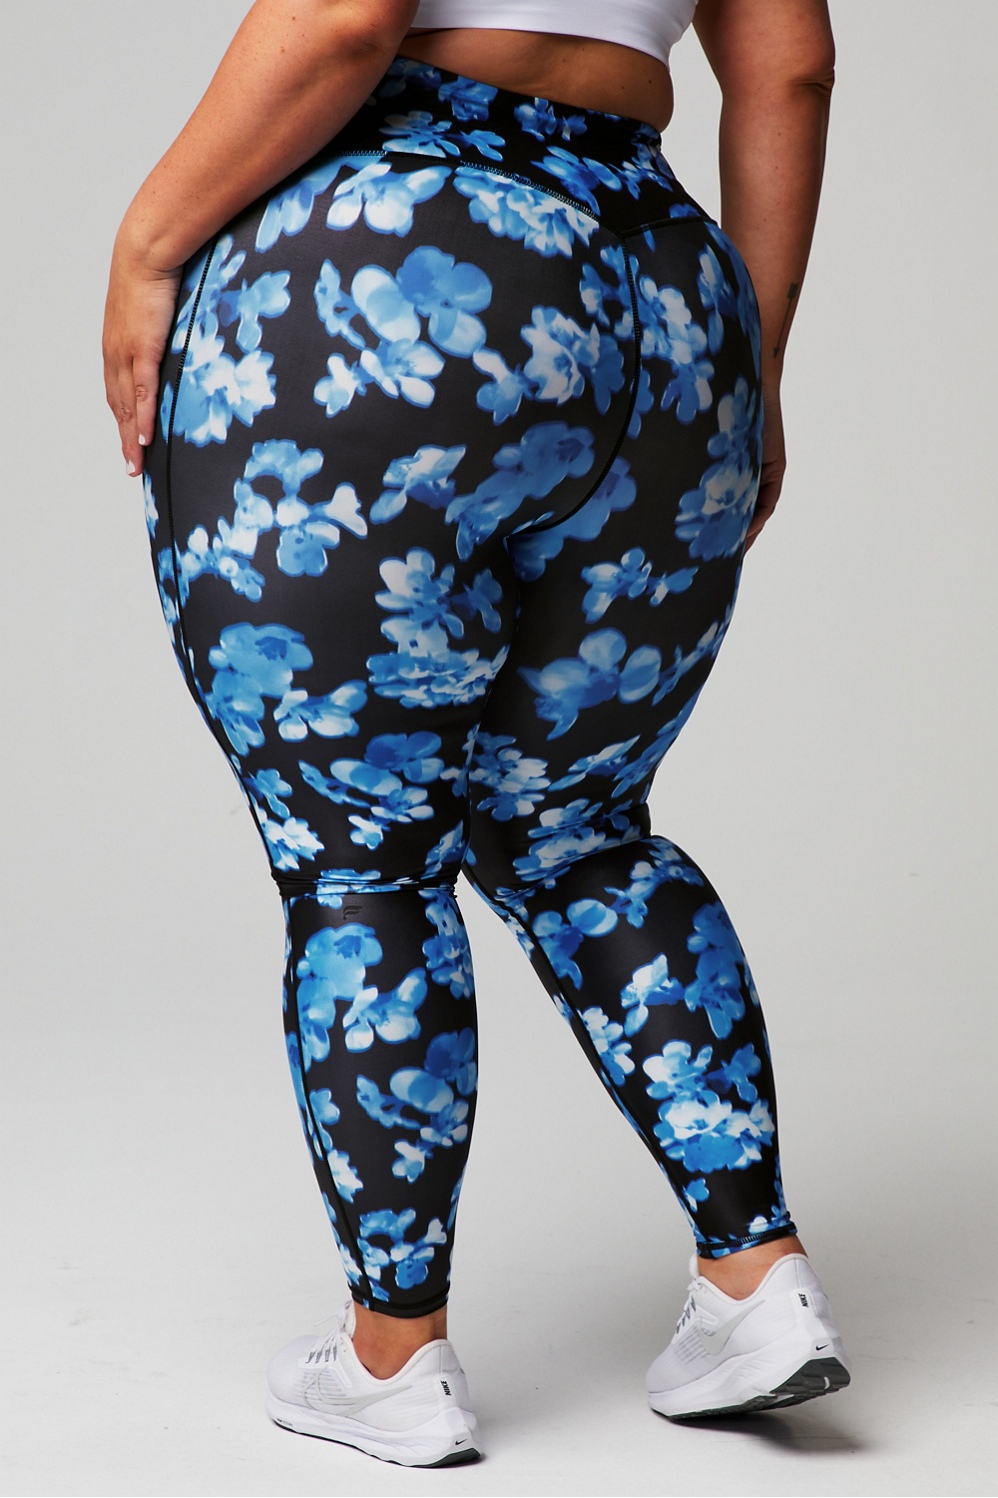 New amazing  2-in-1 Leggings from Shapellx!! *15% OFF Code: 15CO